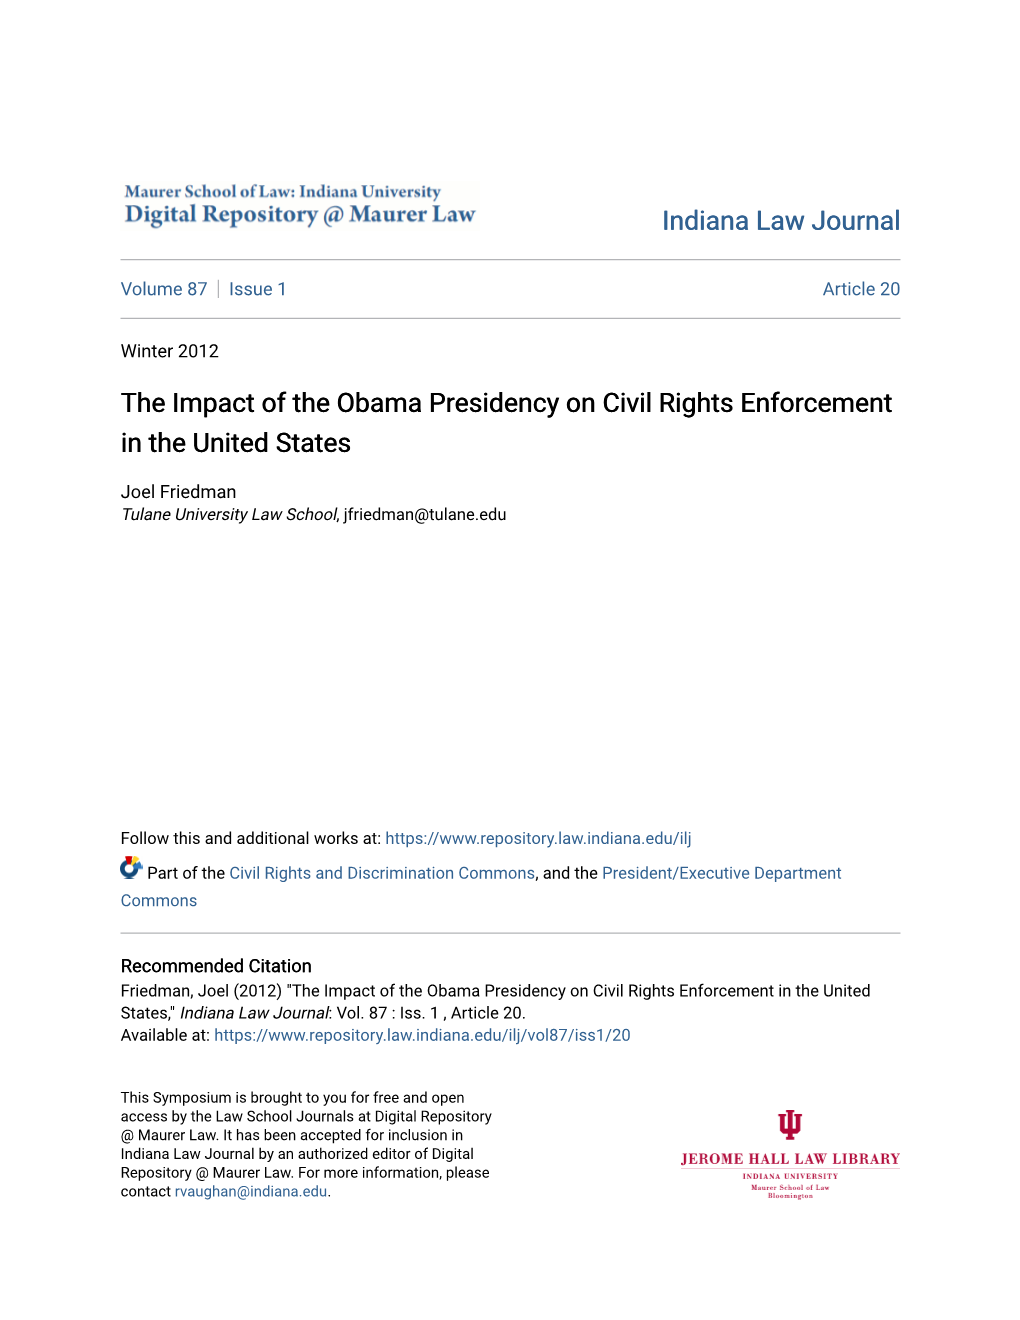 The Impact of the Obama Presidency on Civil Rights Enforcement in the United States